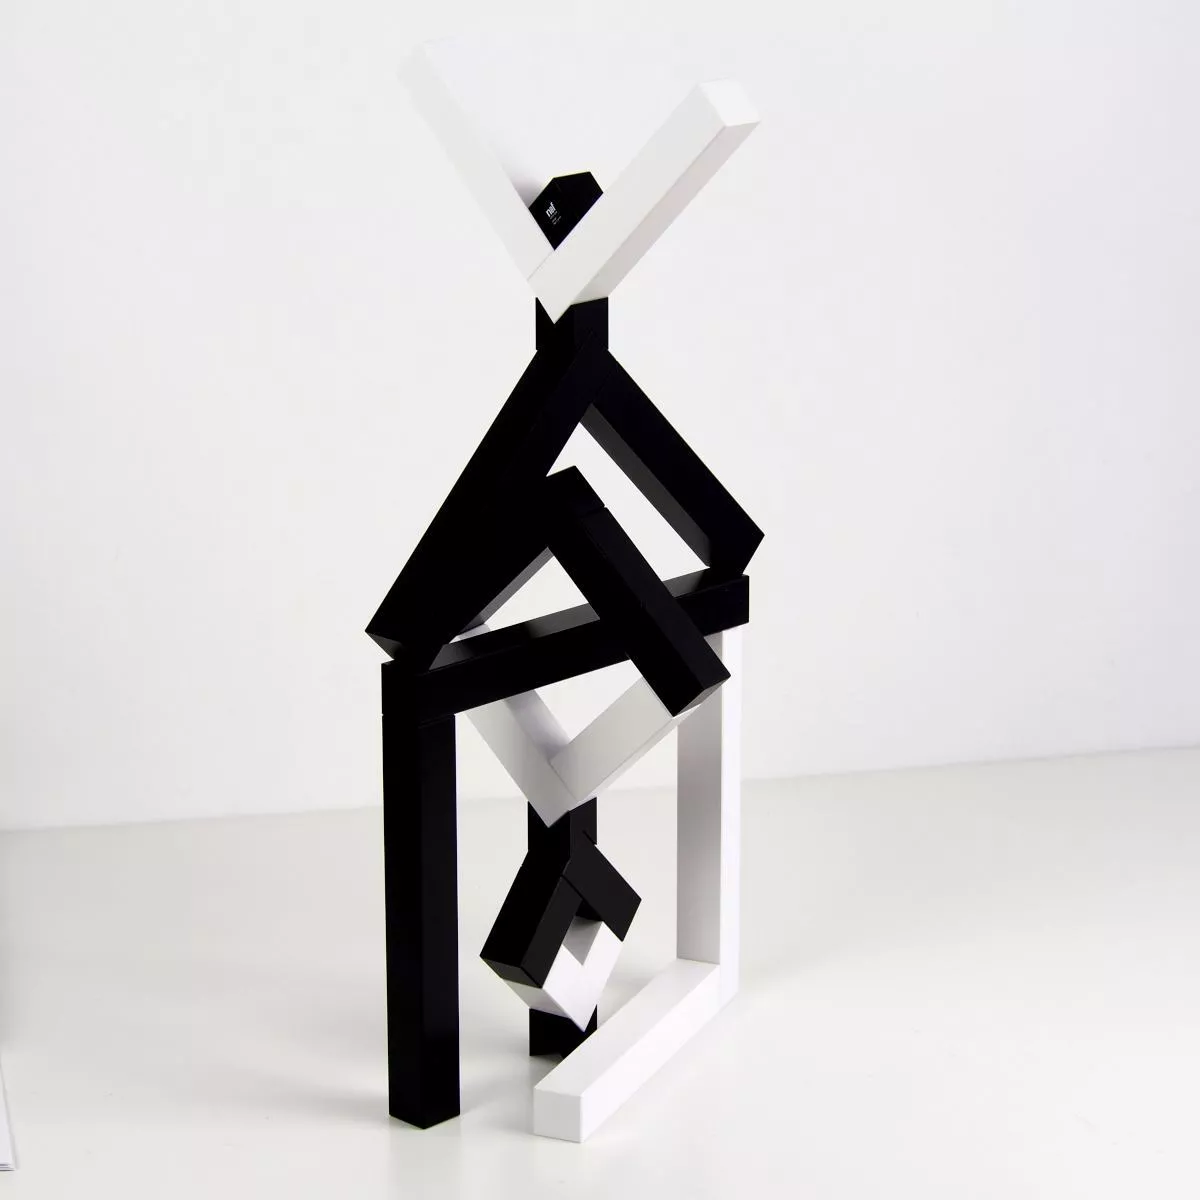 Angular (Black / White) – Original Construction Game by Naef, made of Wood